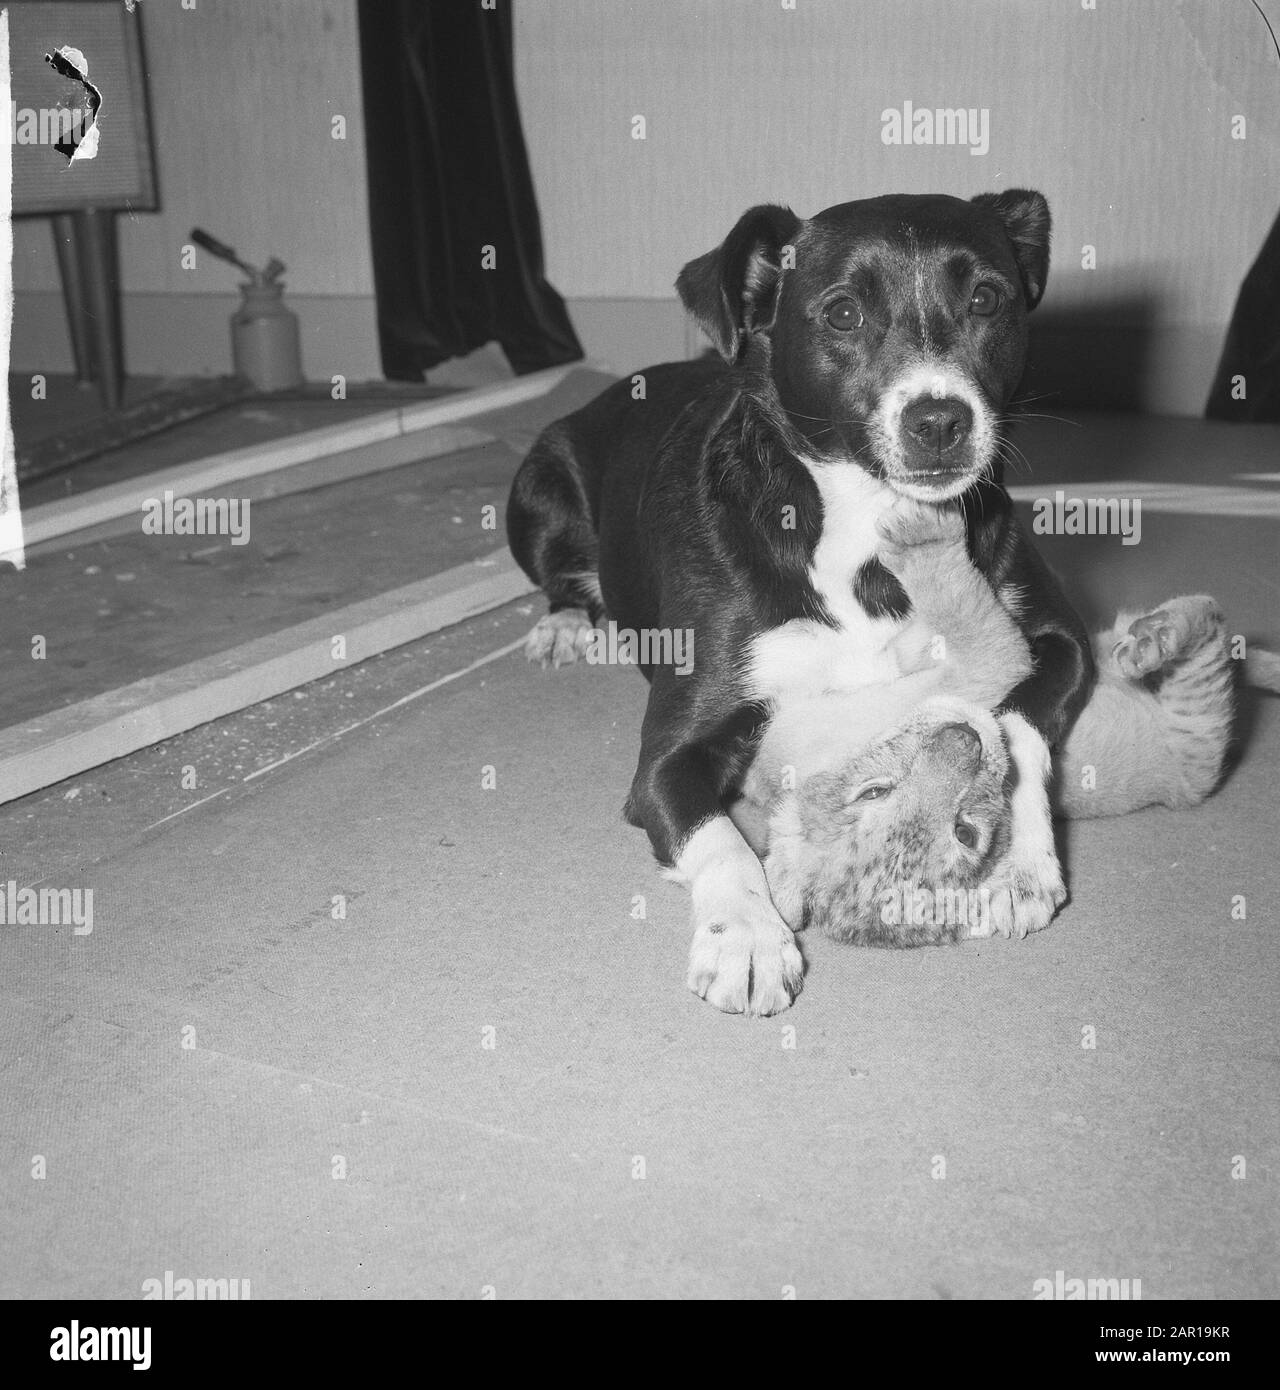 Dog of family Walbeek Hertha takes care of three weeks old lion, Hertha and the lion Date: May 20, 1965 Keywords: families, dogs, lions Stock Photo